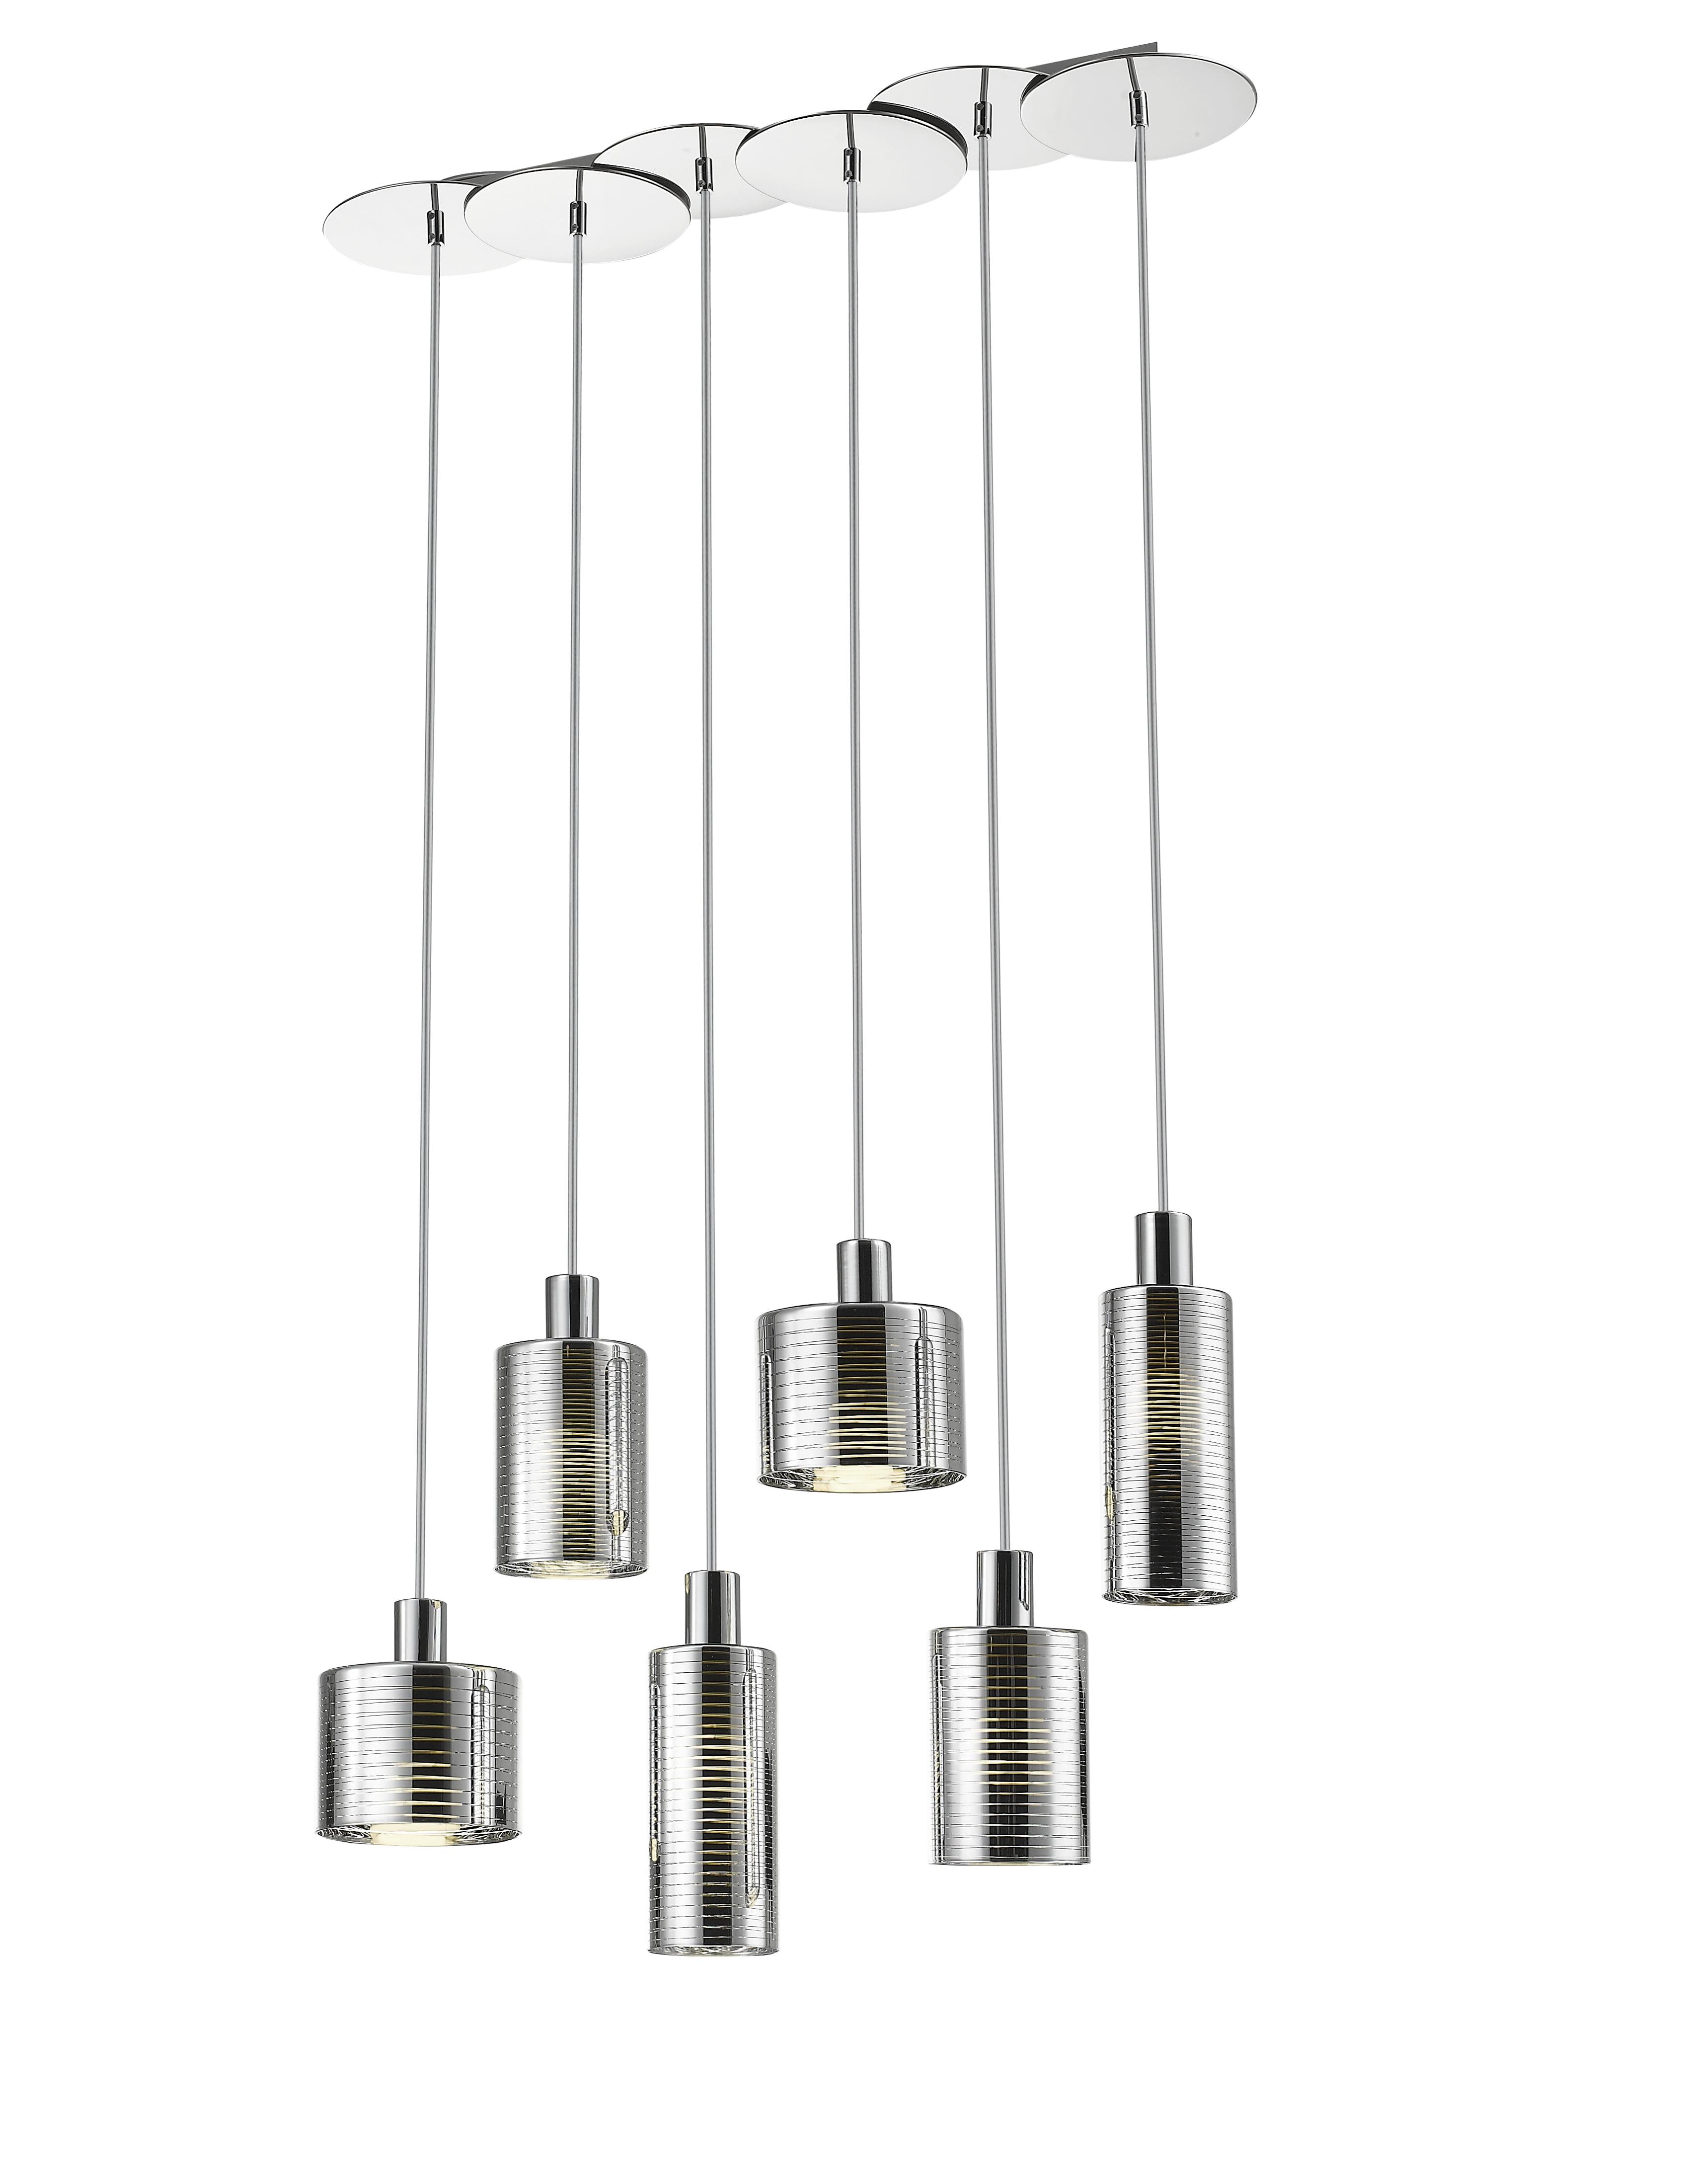 Luxurious Sculptural Chrome Pendant with LED Lights, 84.5" H